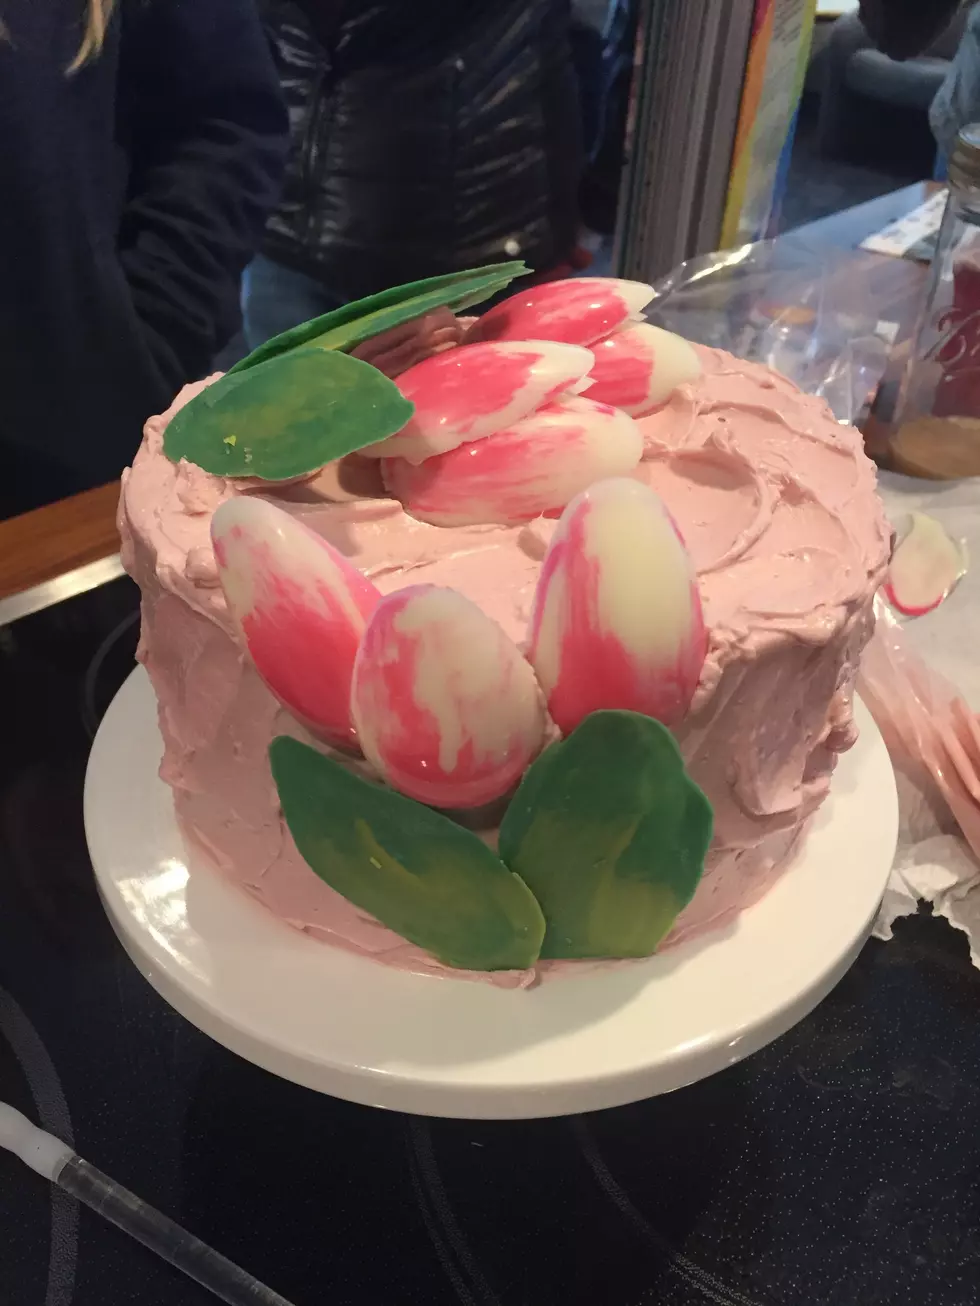 NH Chef Taught Some Very Easy Ways to Decorate A Cake